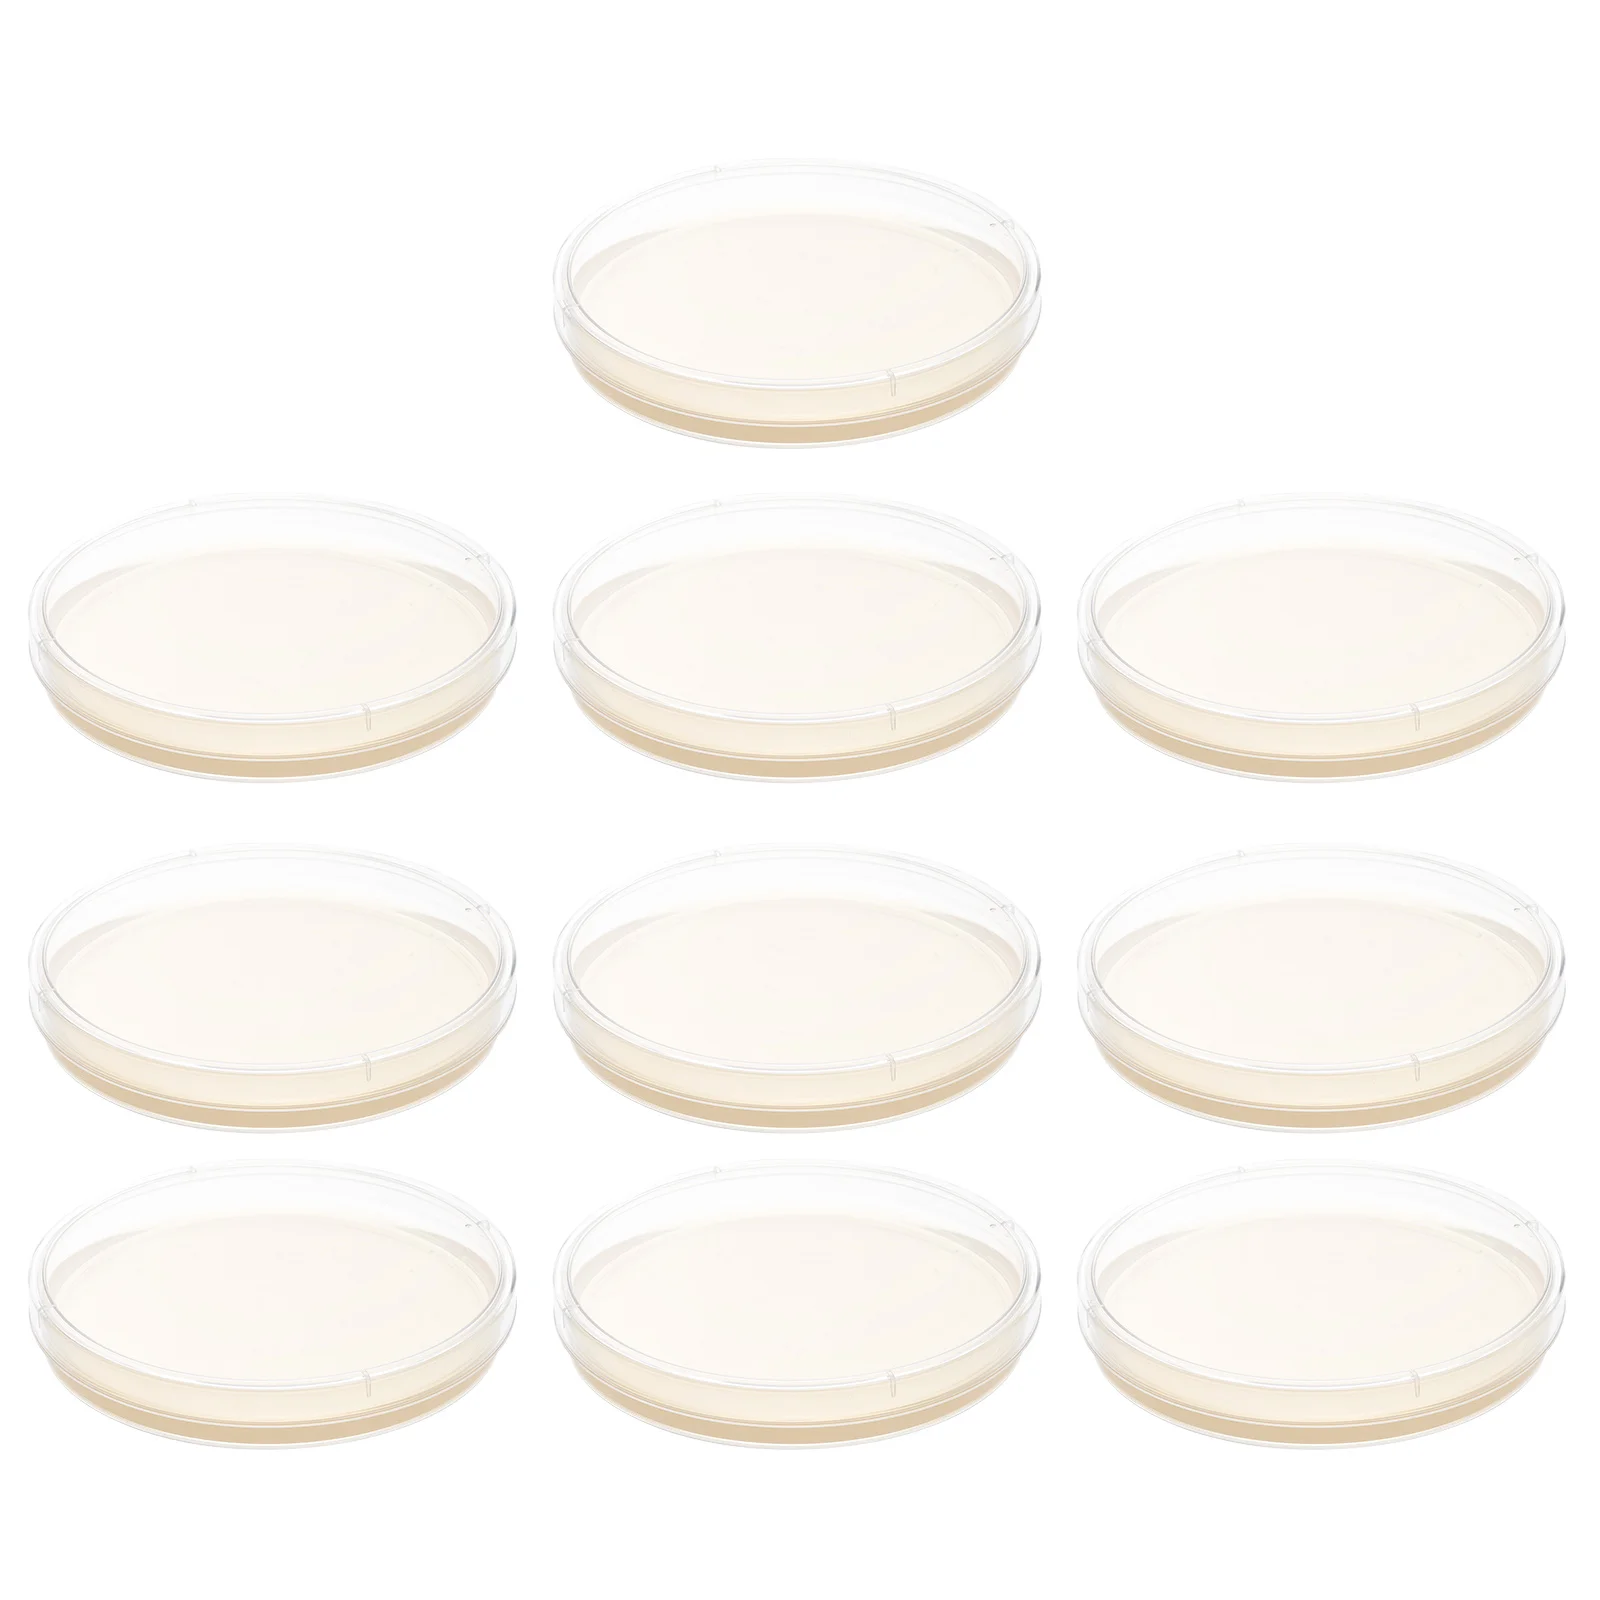 

10 Pcs Nutrient Pre-poured Labs Petri Plates Scientific Tryptic Soy Agar Petri Dishes with Tissue Culture Glass Kids Labs Child